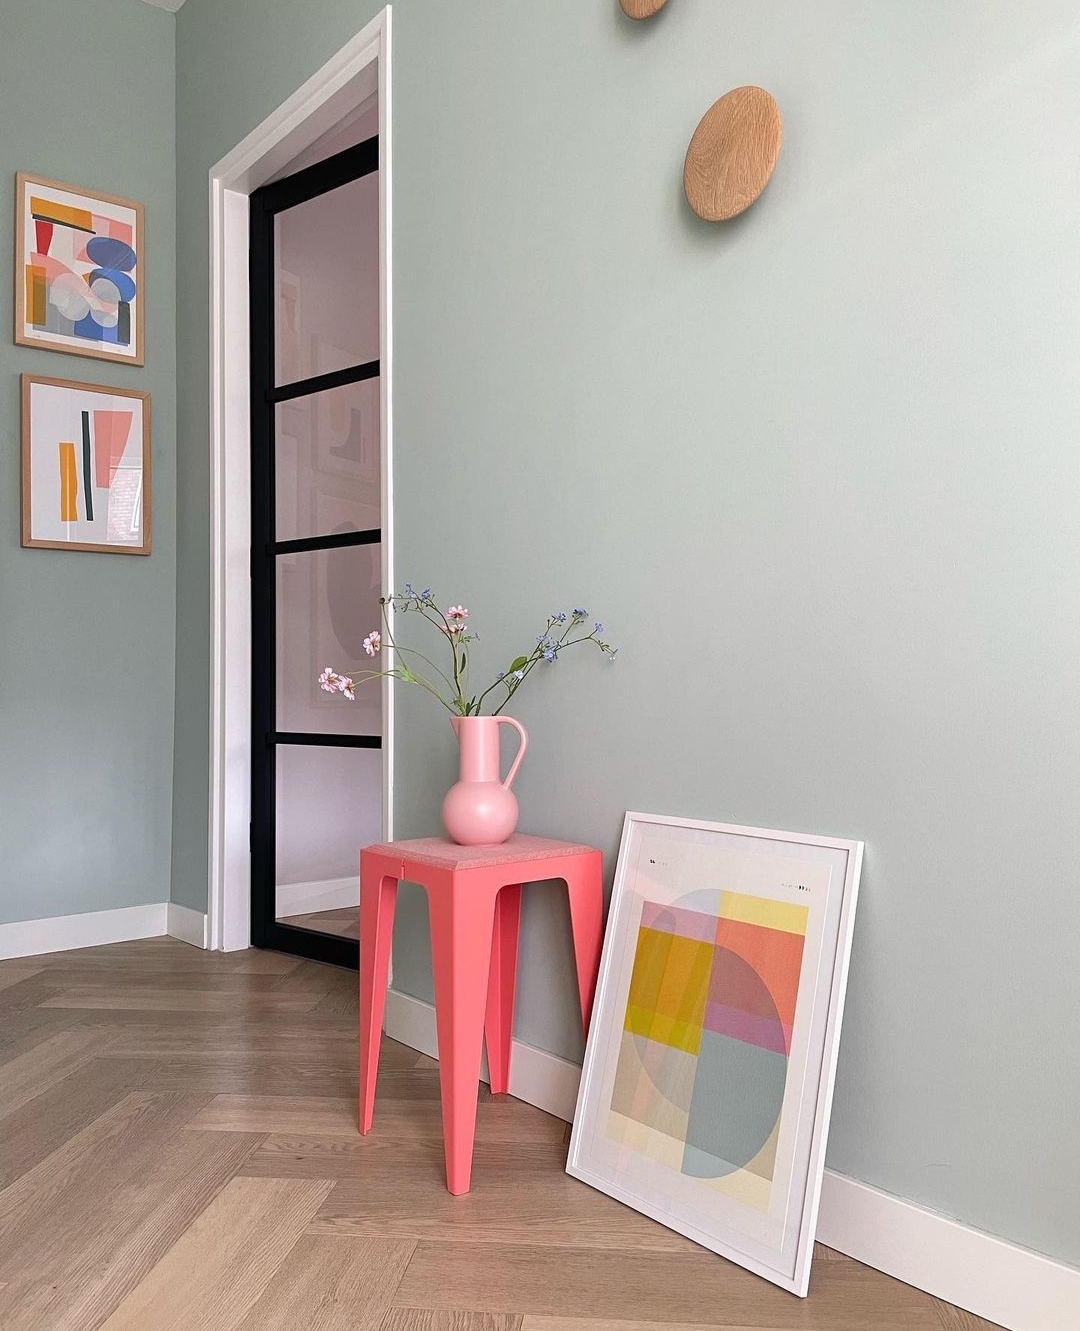 Blue green walls with pink stool in hallway